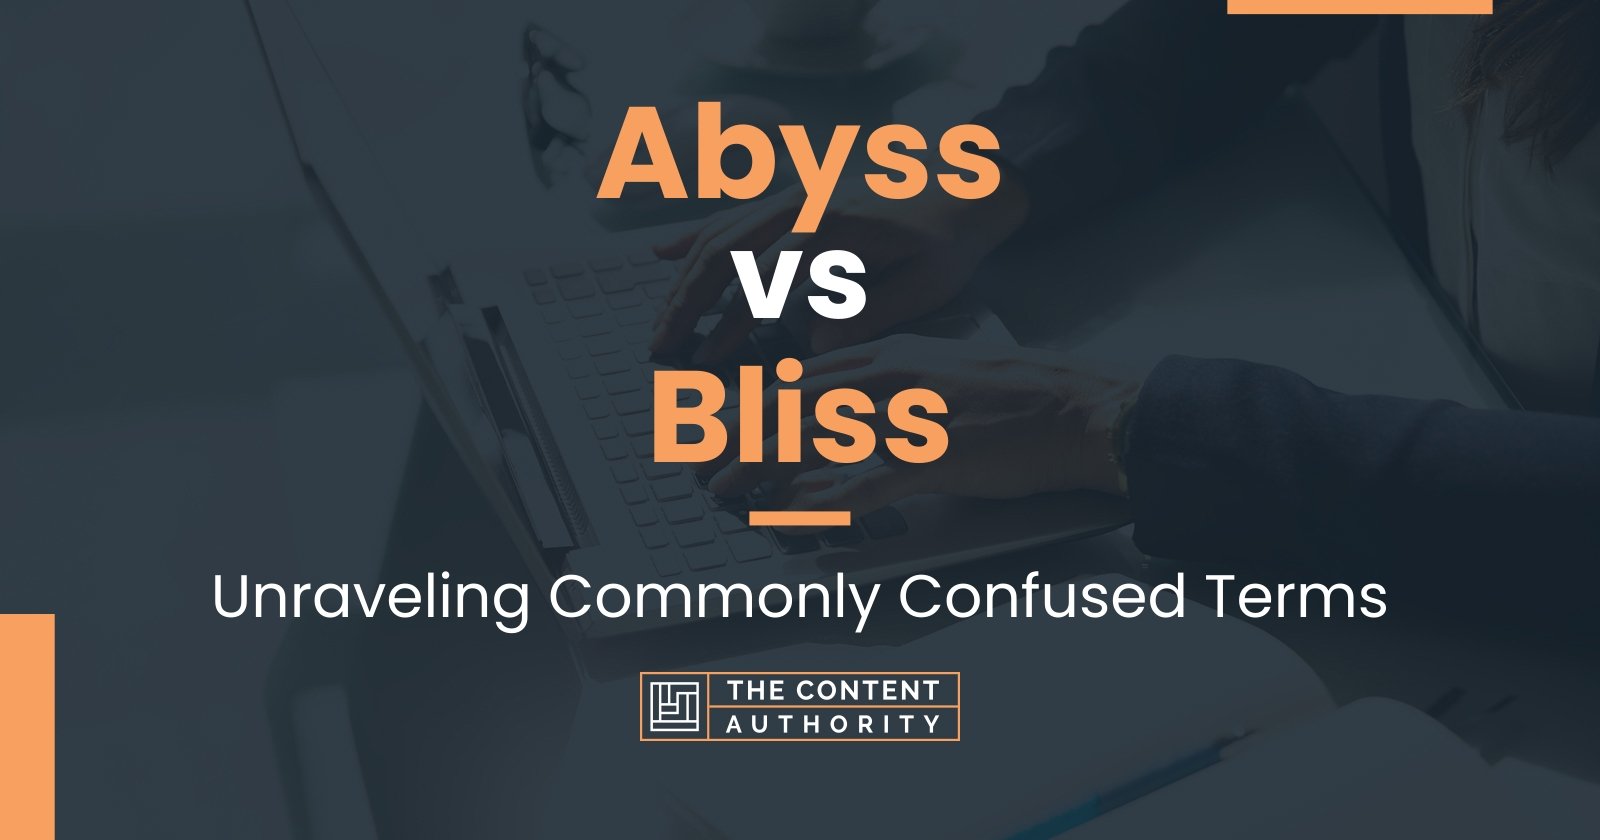 Abyss vs Bliss: Unraveling Commonly Confused Terms